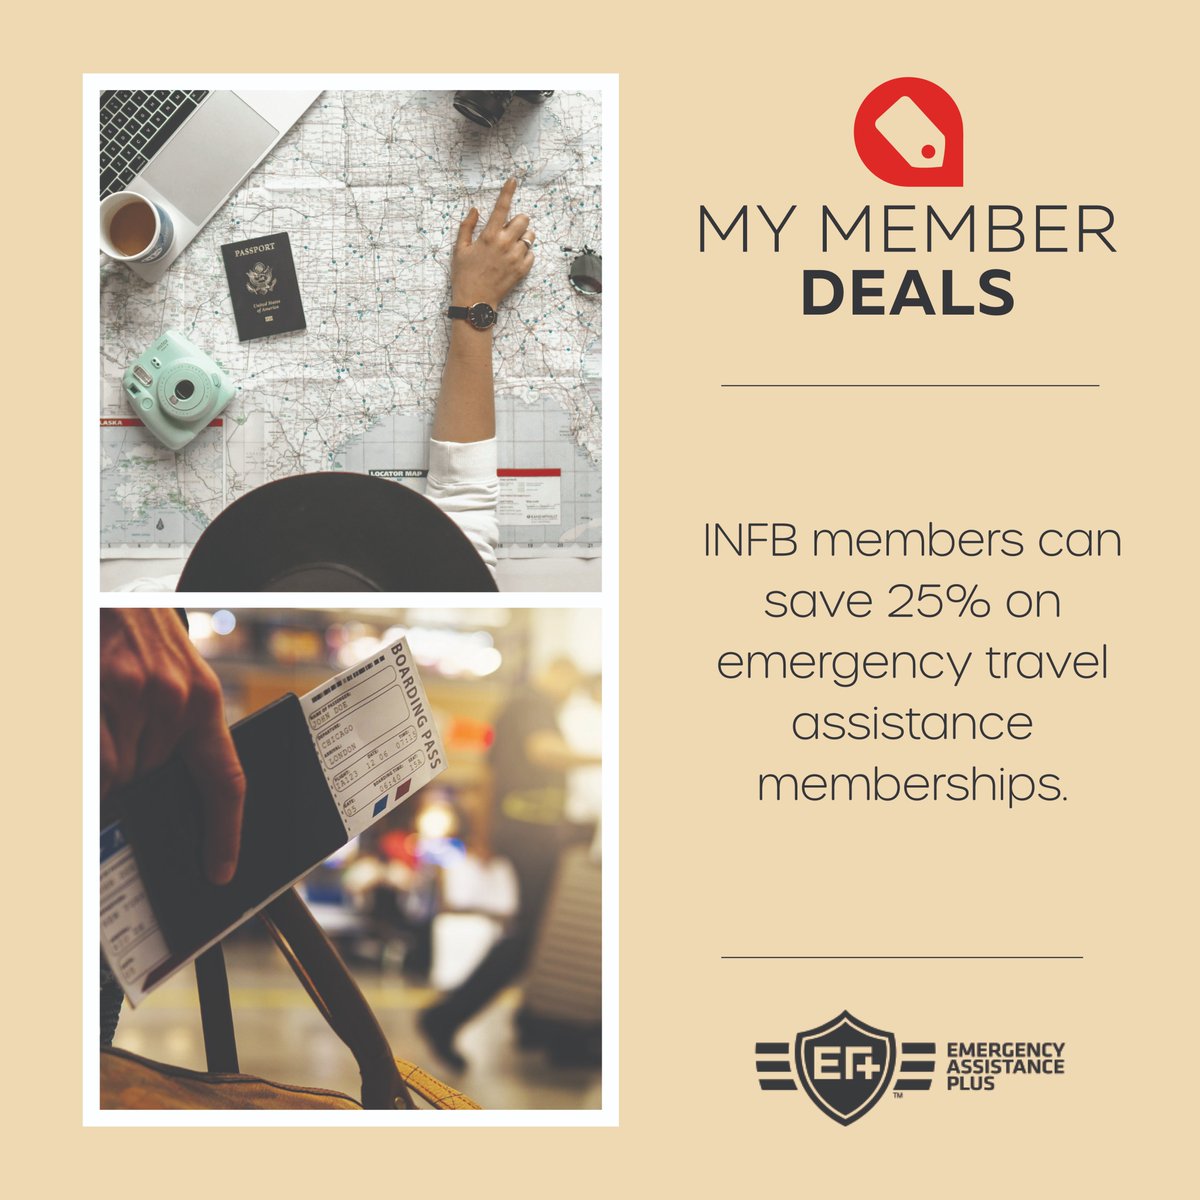 Taking a trip this summer? Pack peace of mind with an Emergency Assistance Plus plan. INFB members can save 25% on available plans. Learn more about this deal and others at infb.org/memberdeals. #MembershipMonday